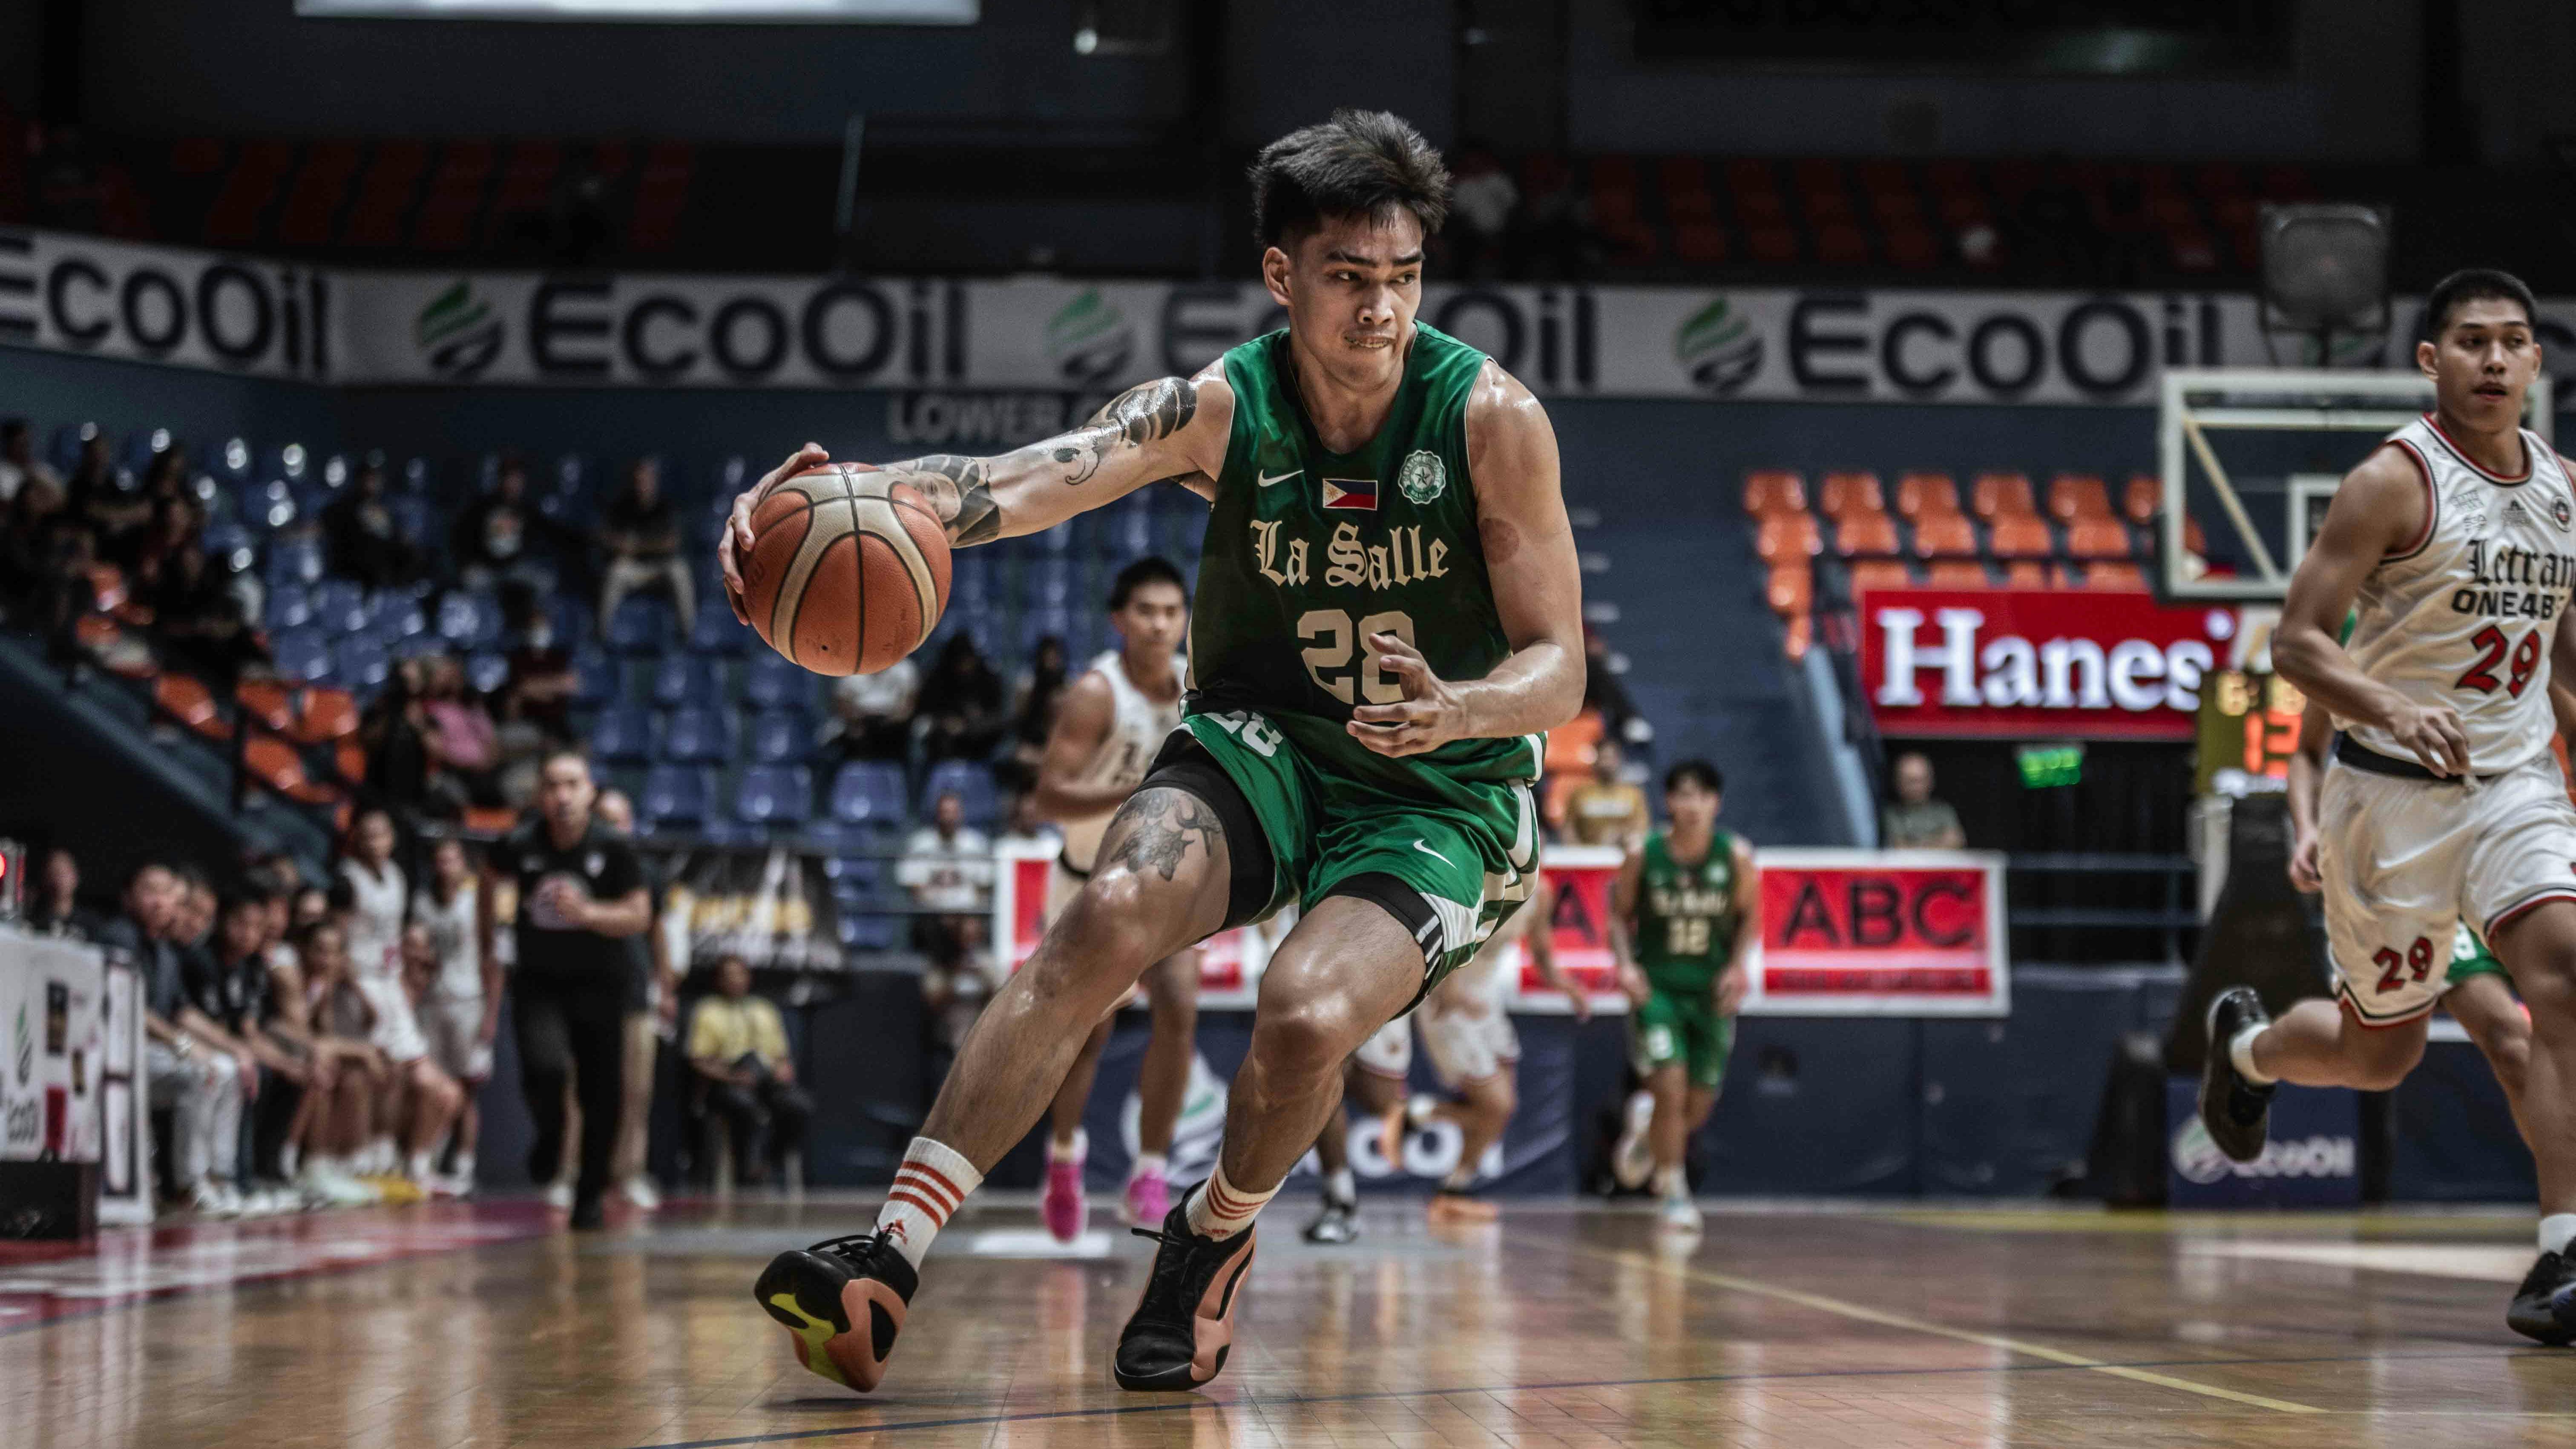 Kevin Quiambao shifts focus to Gilas Pilipinas after hectic preseason stints with La Salle
